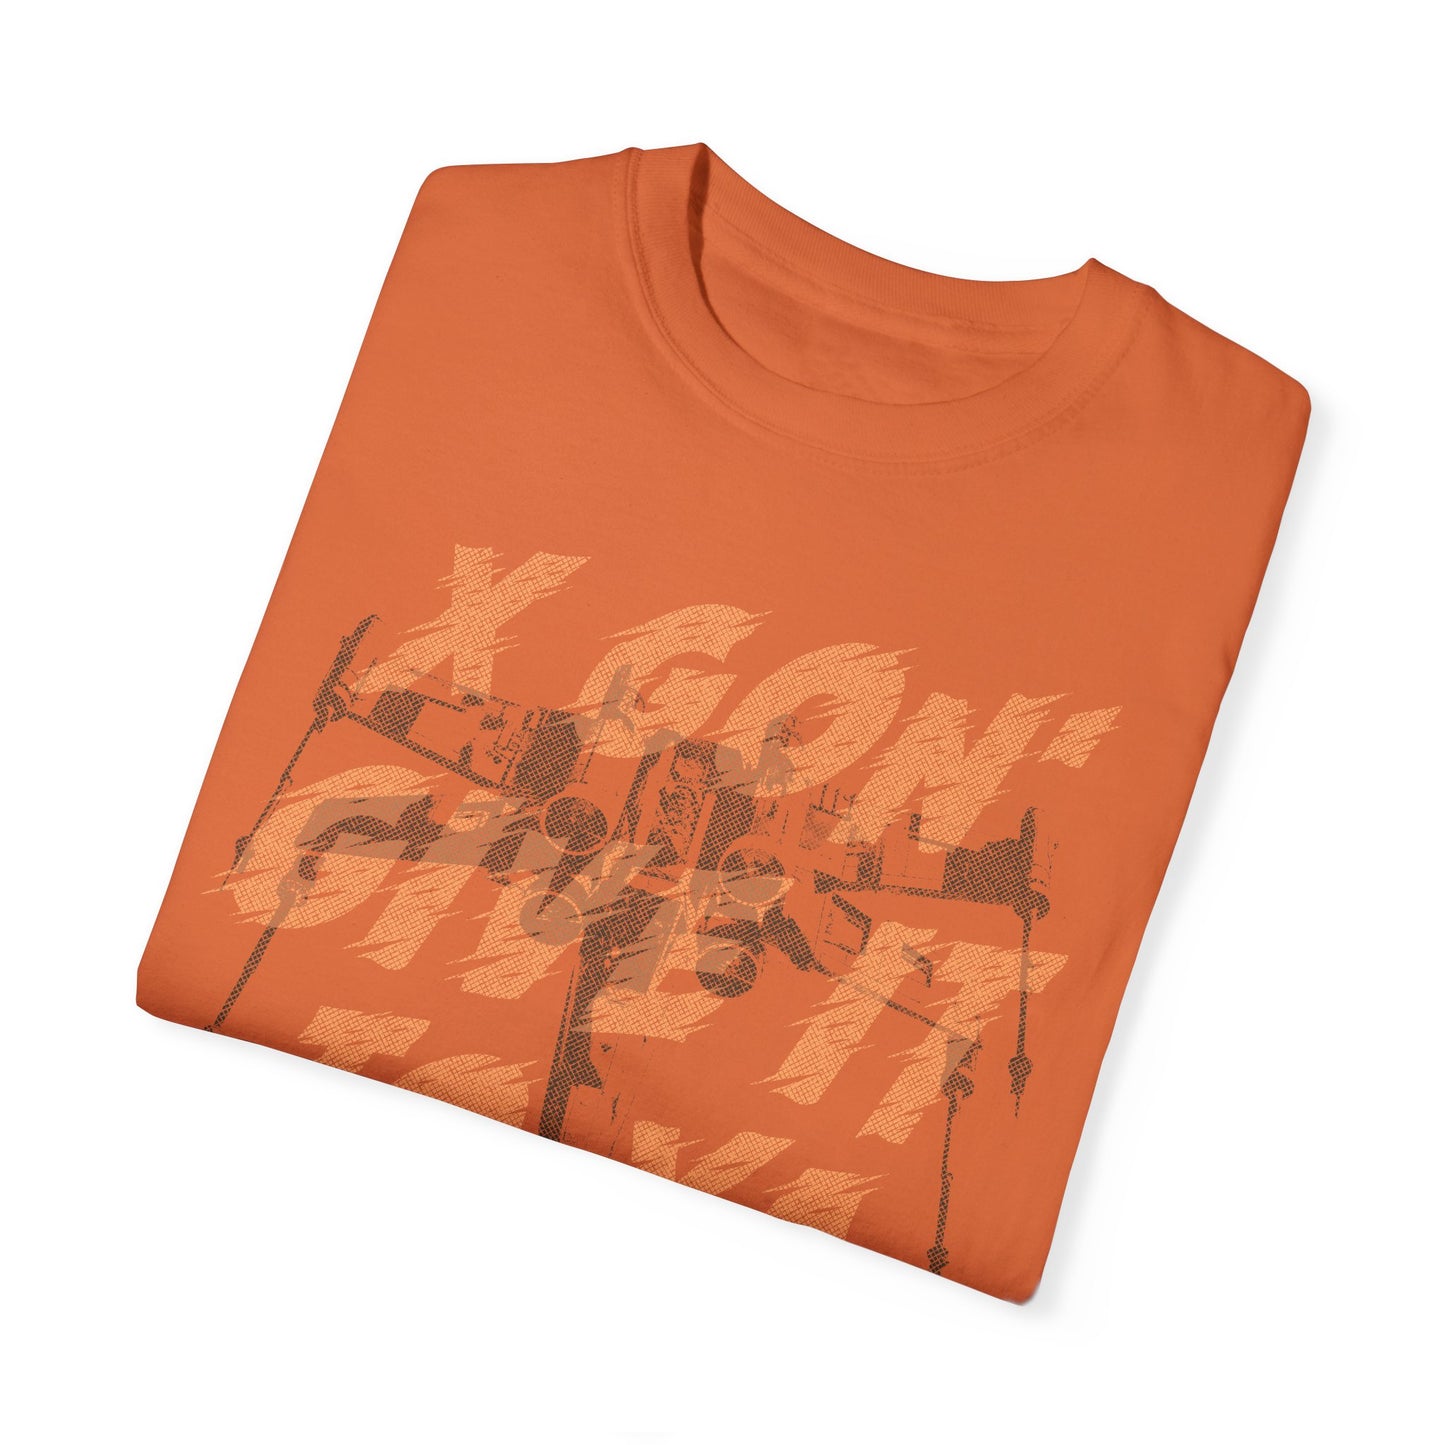 X-Wing Gon' Give It To Ya t-shirt